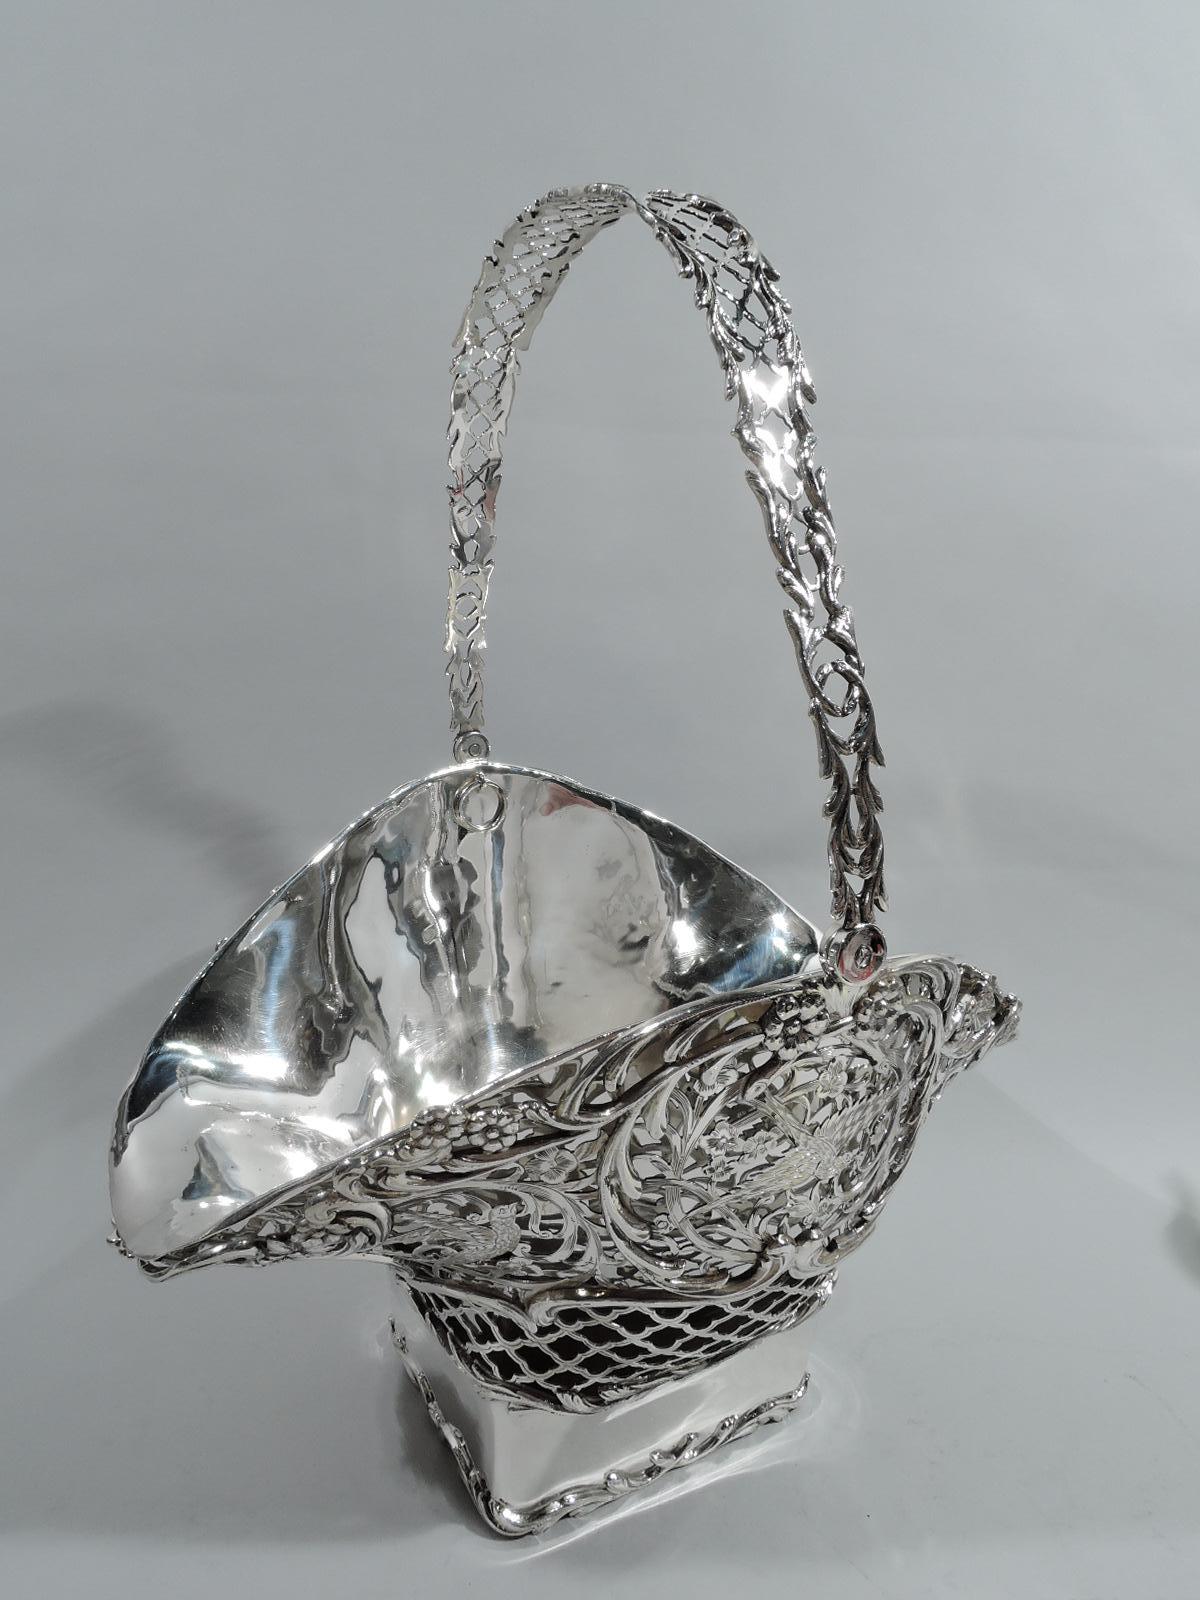 Edwardian Art Nouveau sterling silver basket. Made by William Comyns in London in 1906. Plain and solid square base with applied leafing scroll borders. Sides curved and mouth oval. Open diaper and leafing scrollwork with applied and engraved flower